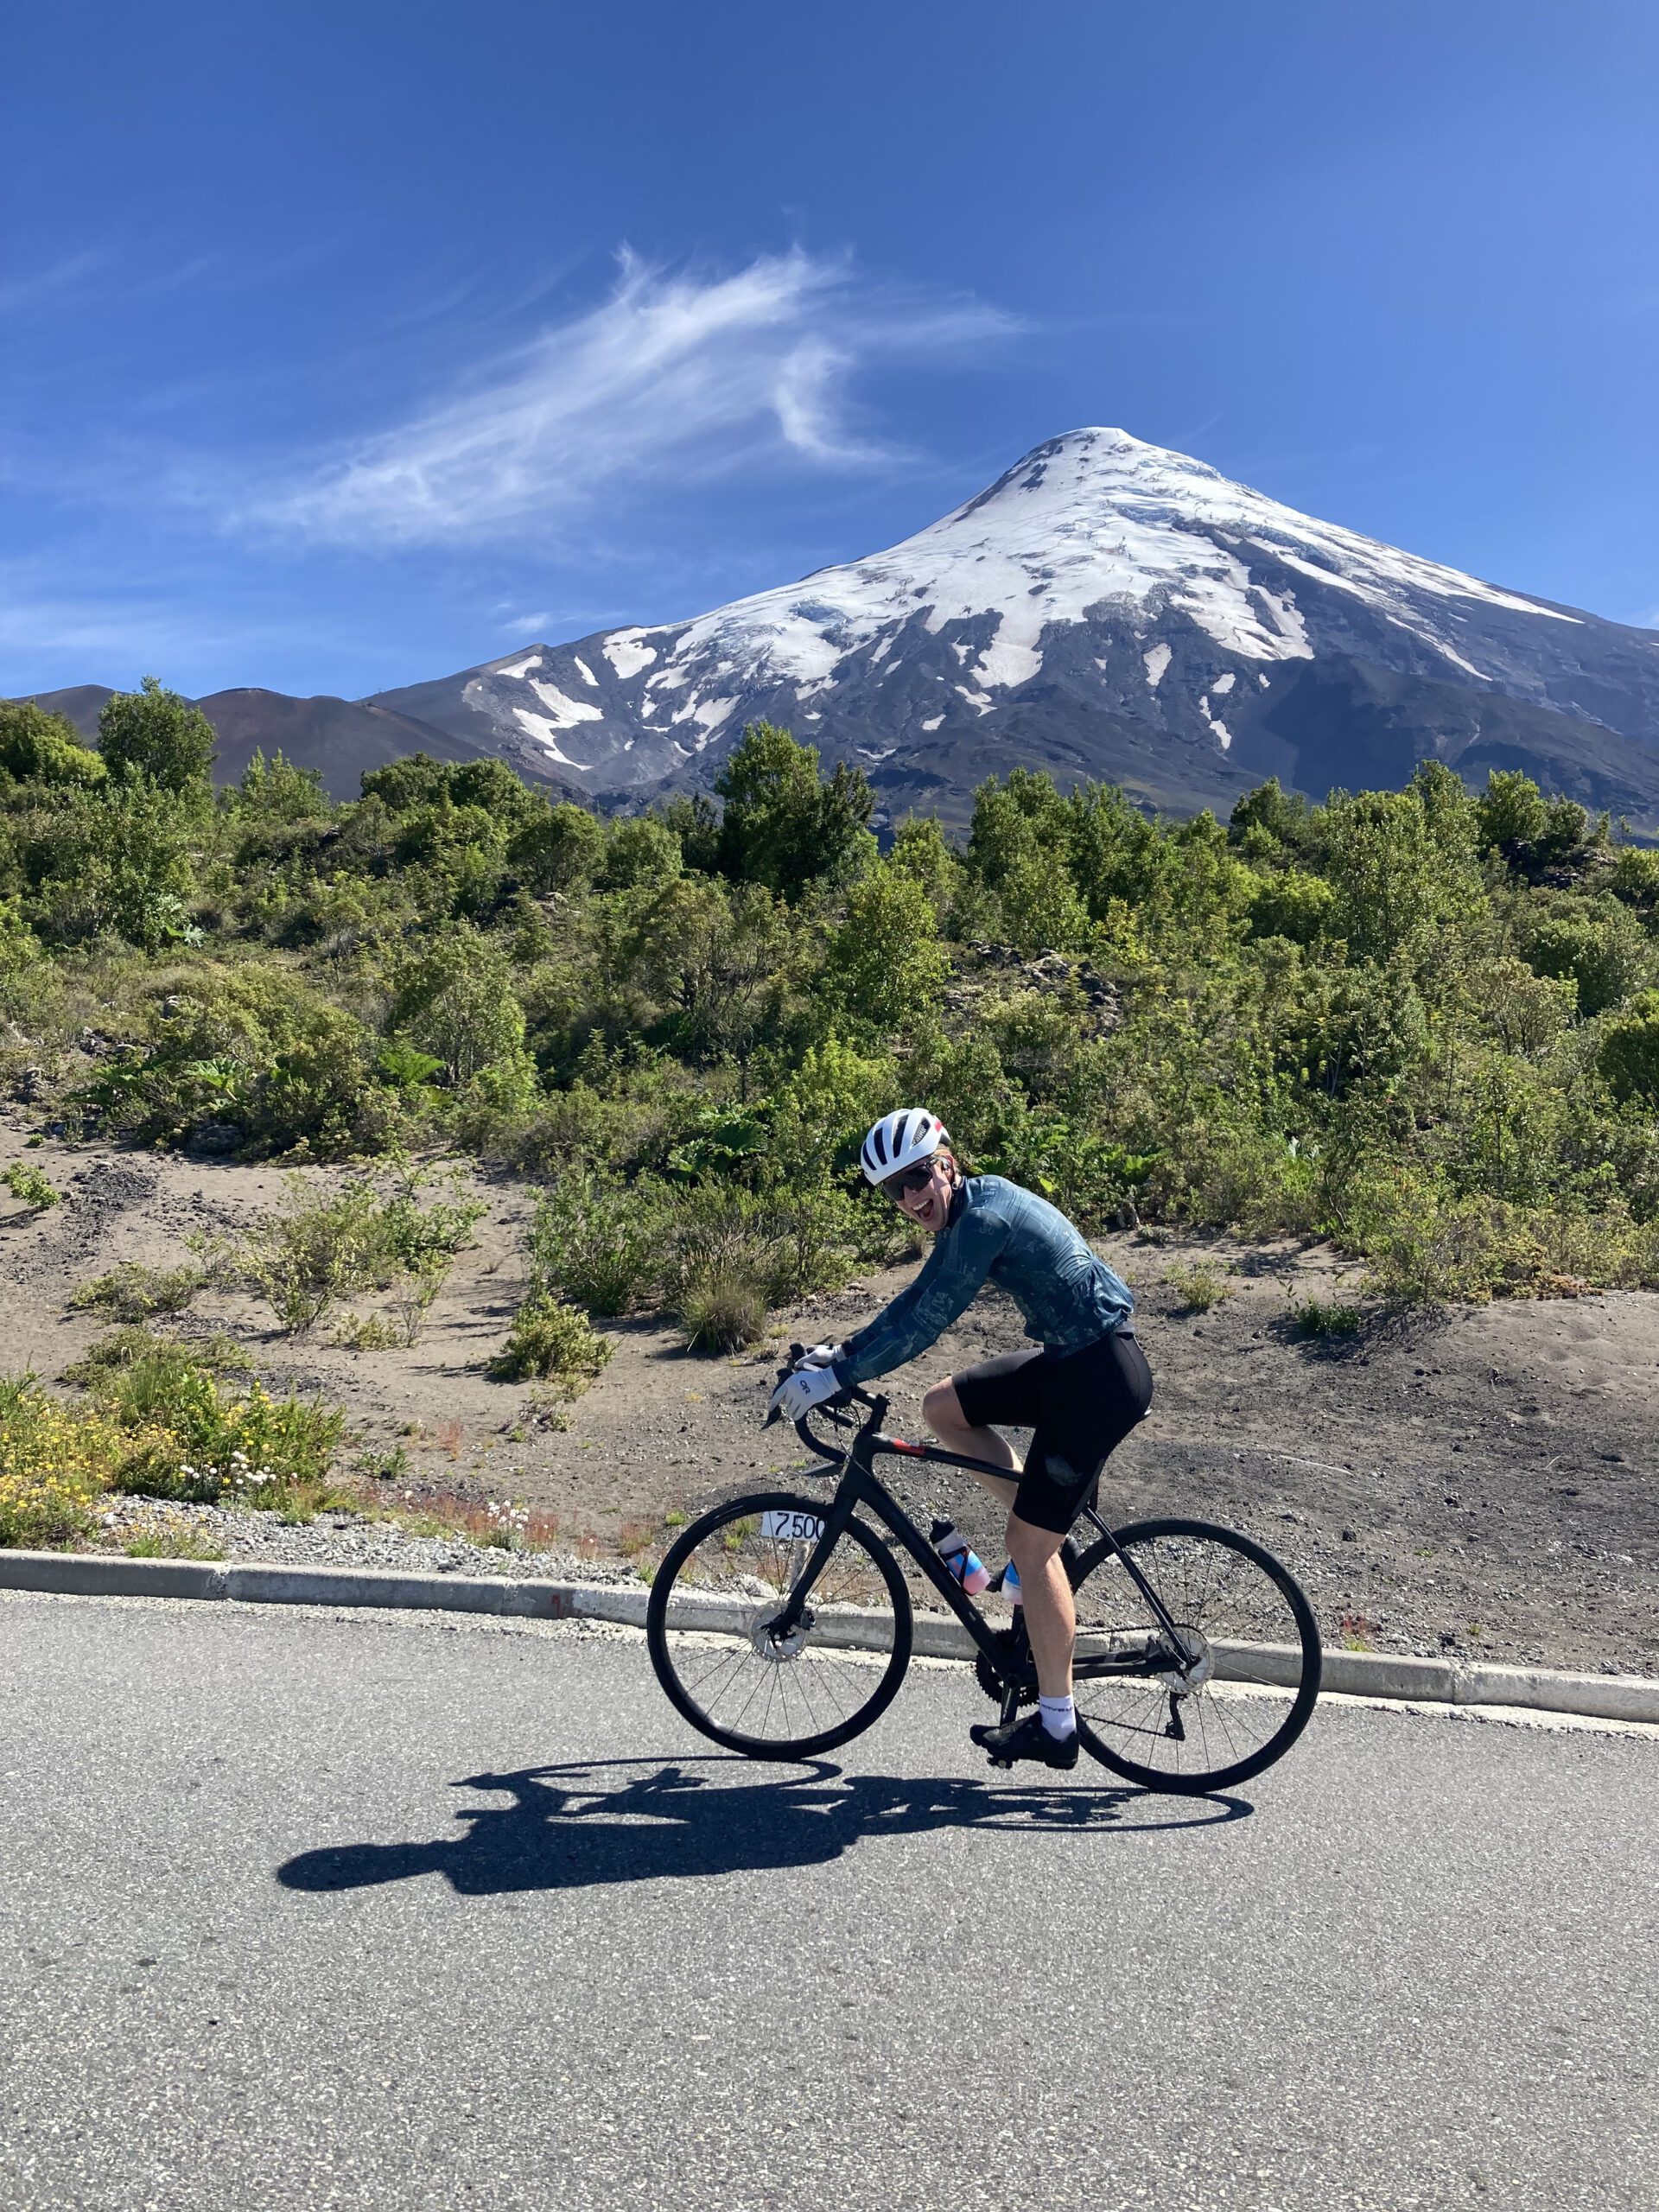 Cyclist in Chile with snow-covered volcano in the background